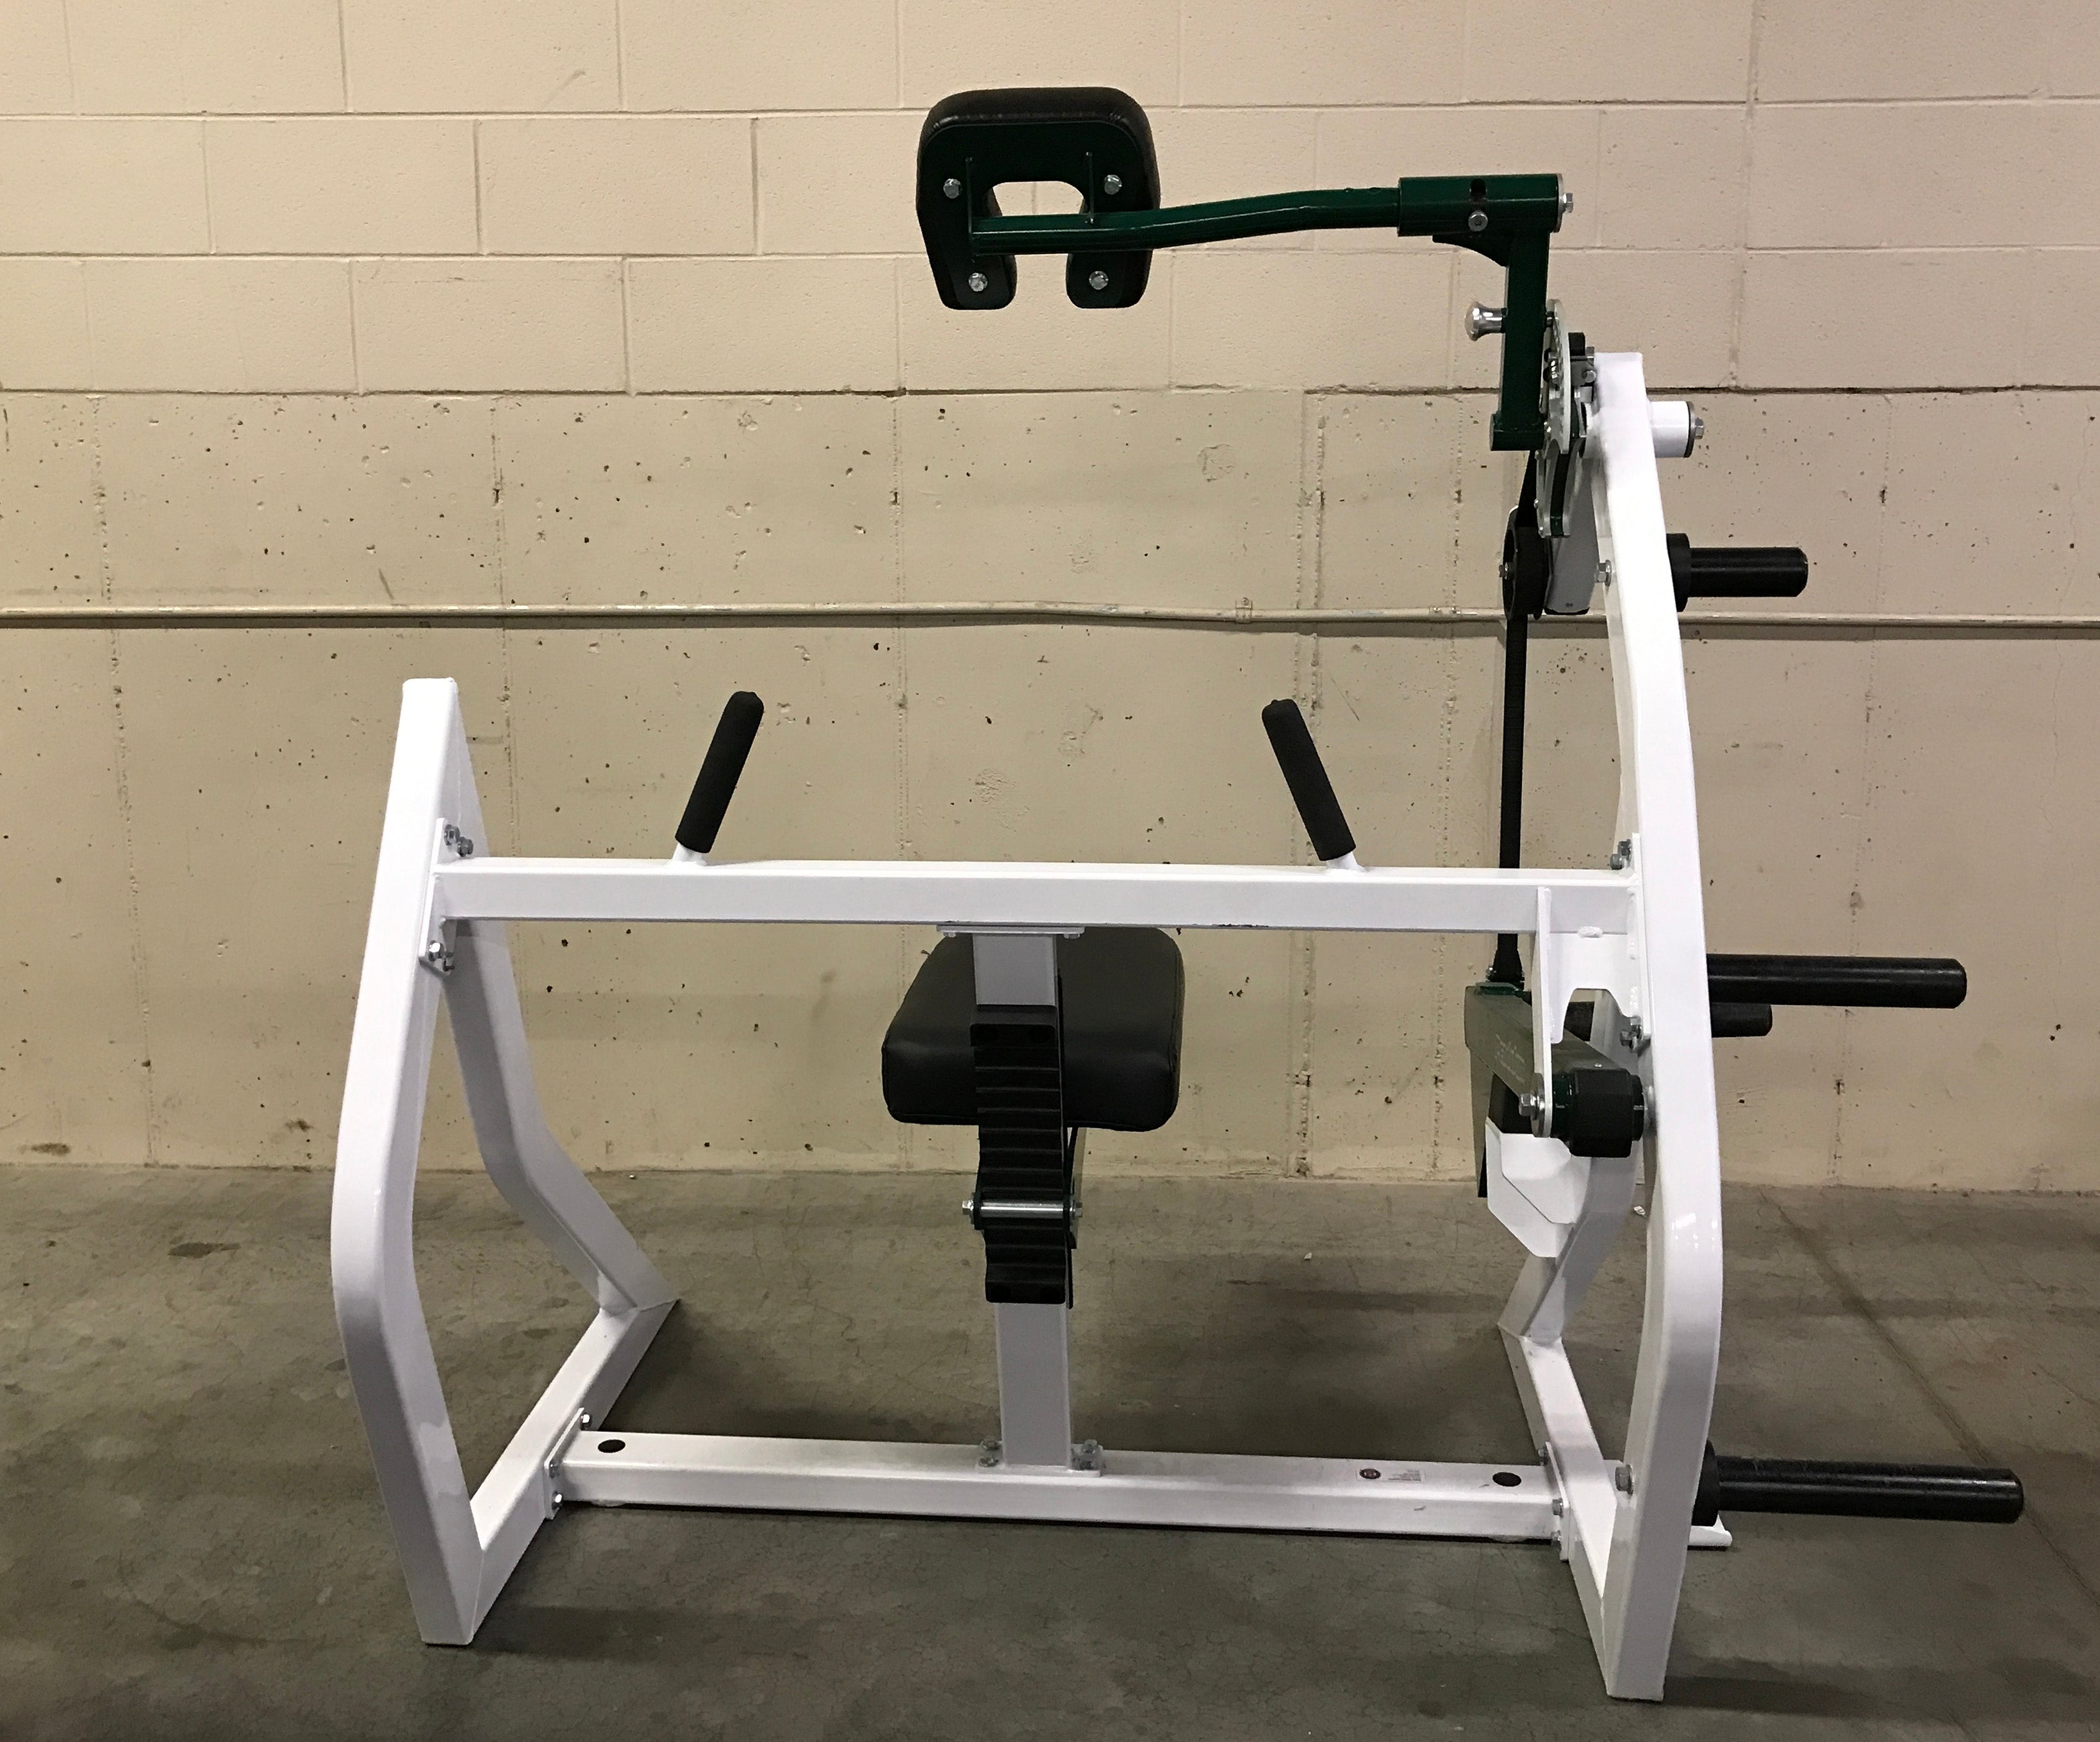 Rogers Athletic Co. 4 Way Neck Machine